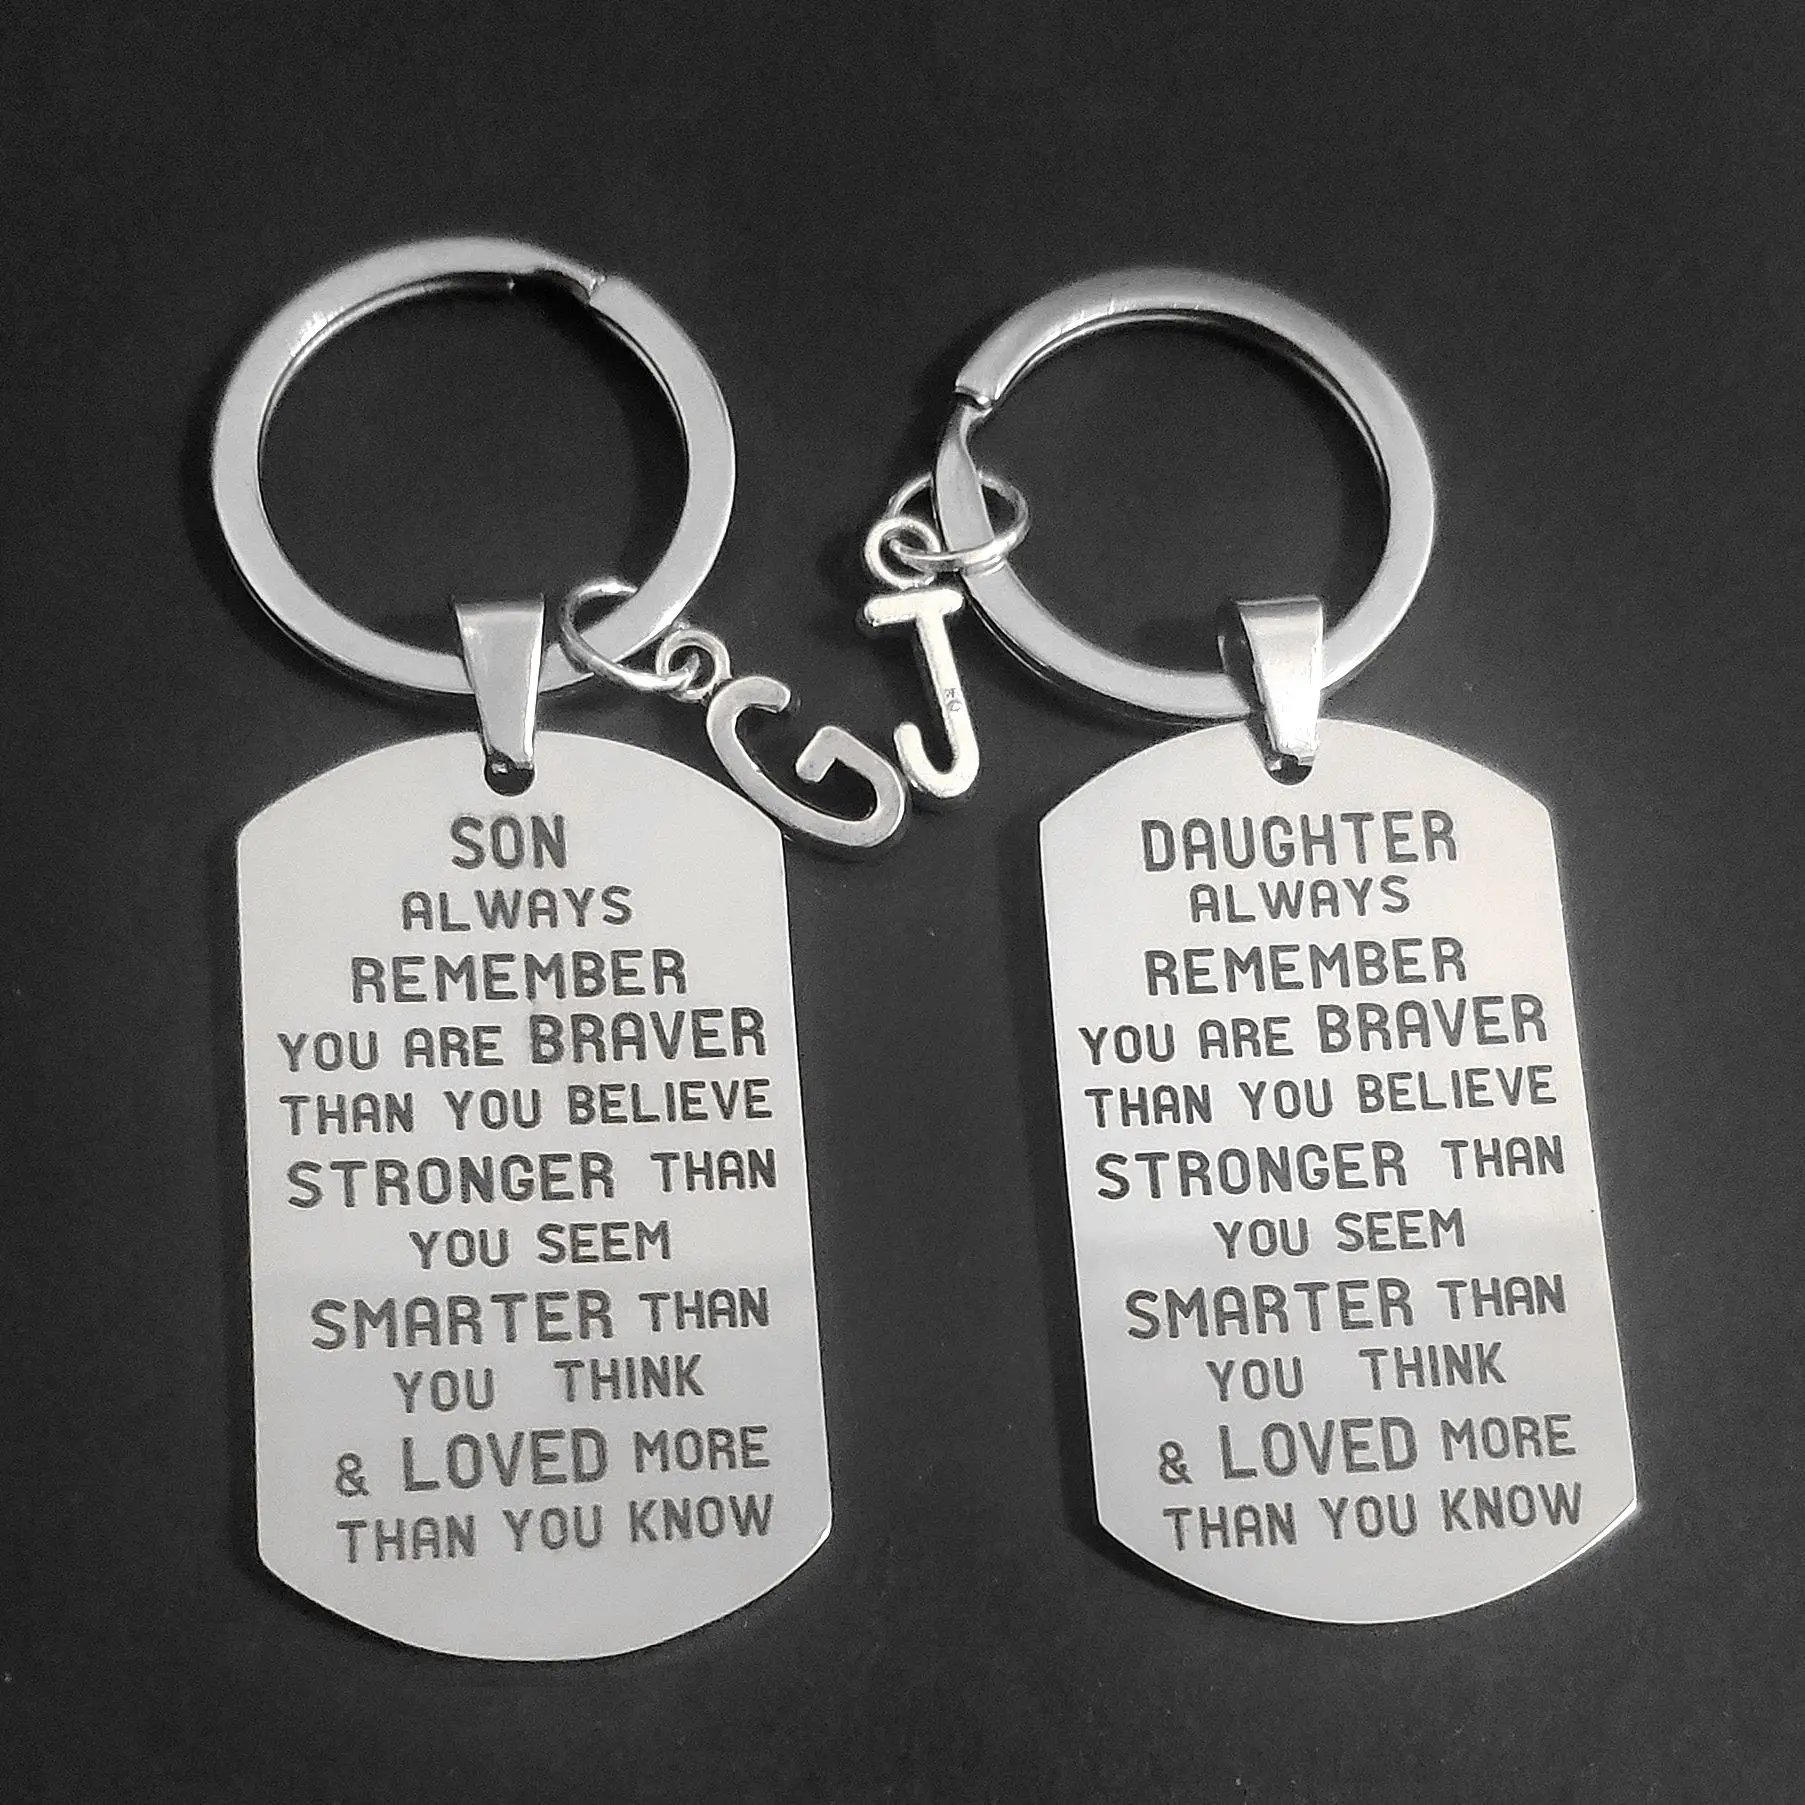 

26 Letters Keys Holder Birthday Creative Keyring SON DAUGHTER Military Tags Stainless Steel Kid Gifts DIY Graduation Carabiner